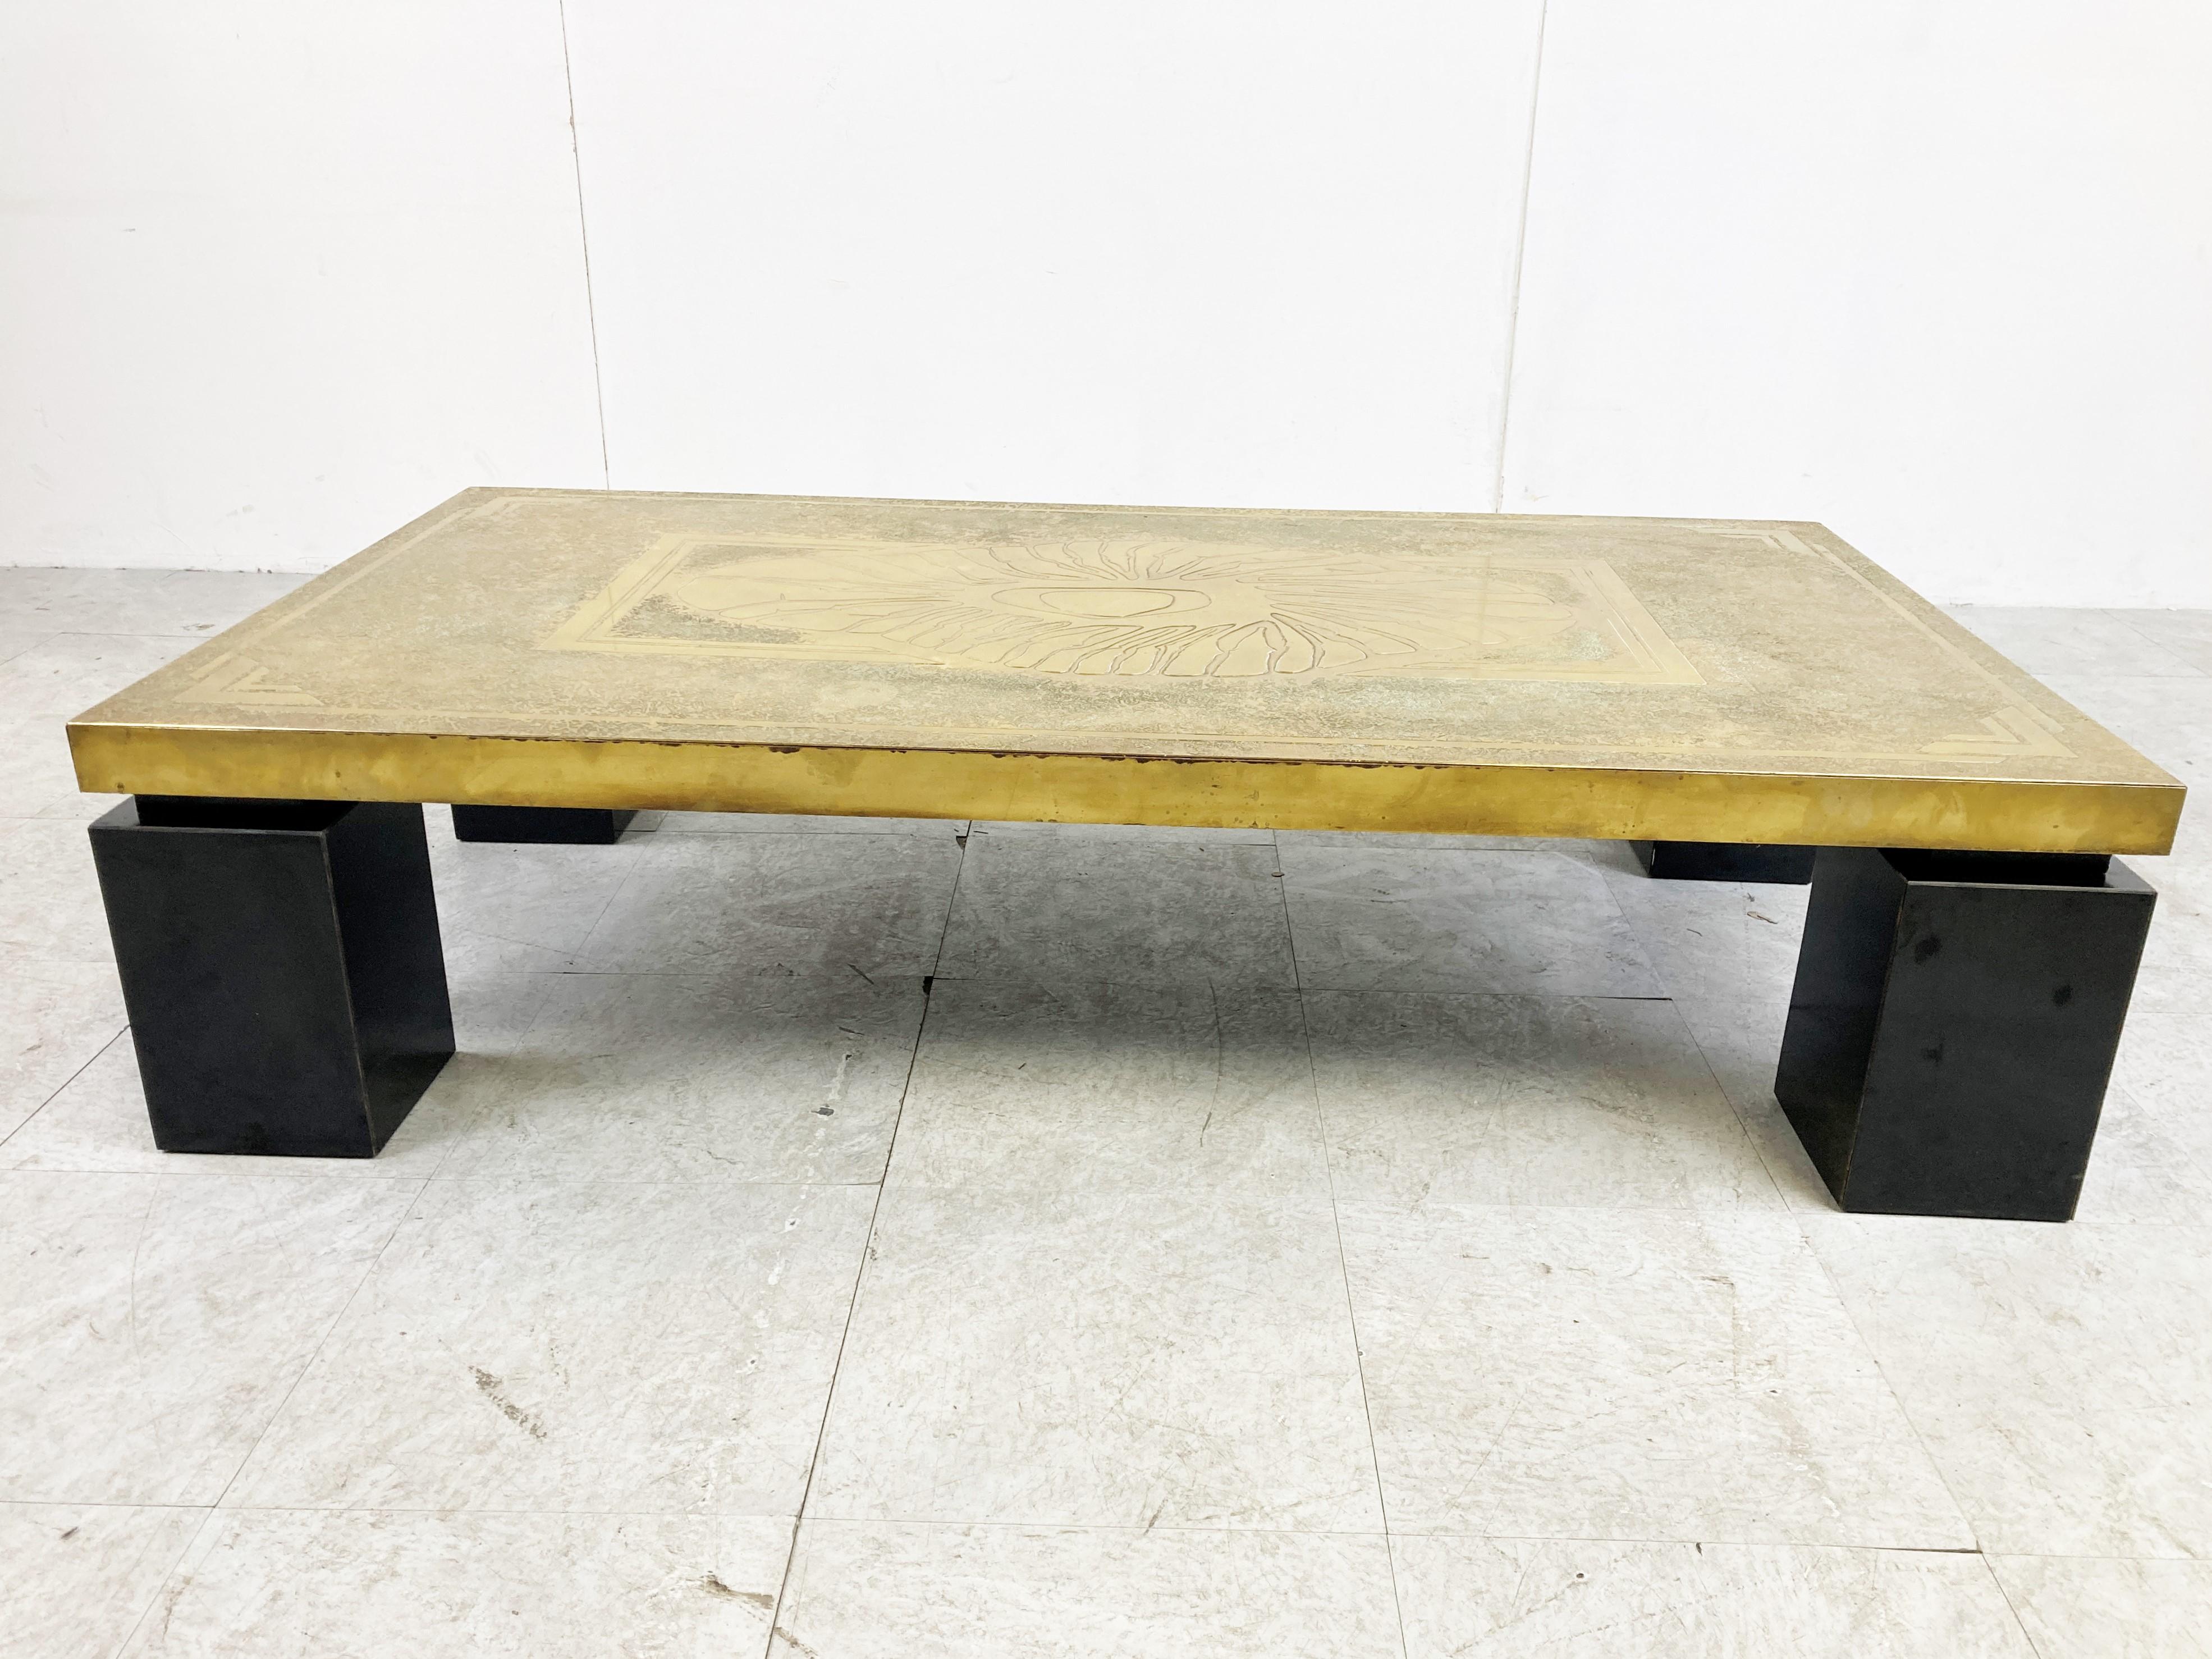 Lacquered Vintage Etched Brass Coffee Table by Georges Mathias, 1970s